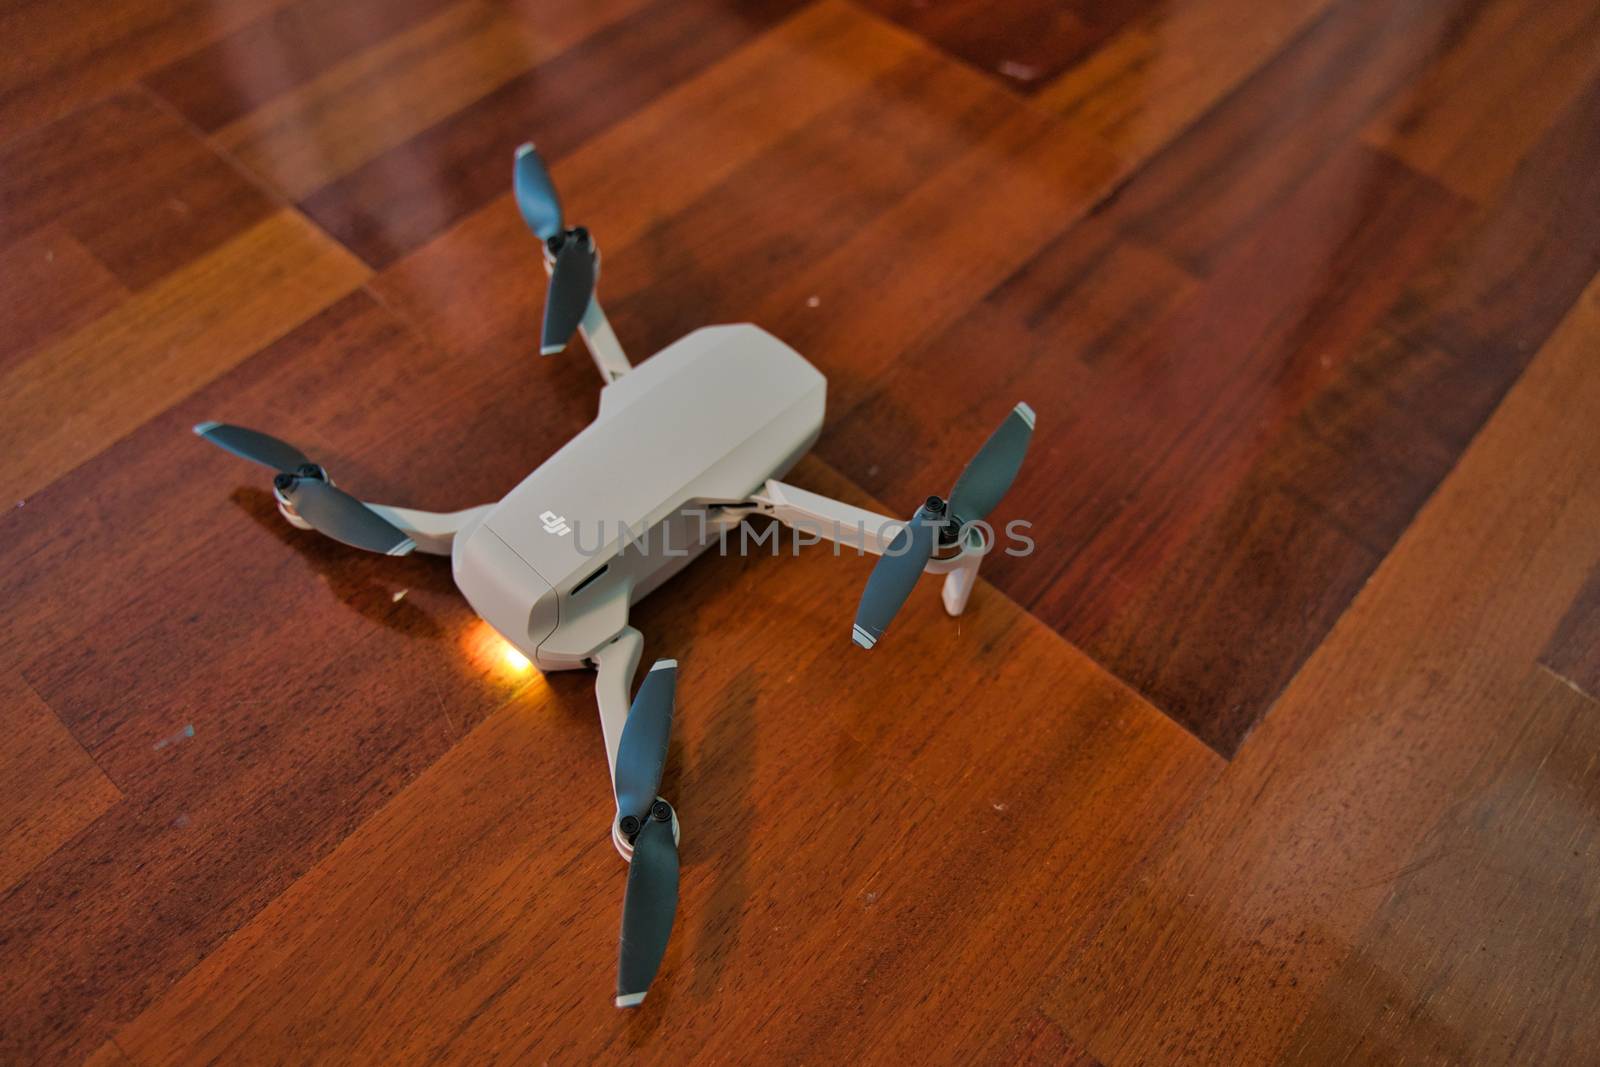 Drone sitting on wooden floor with light on indicating dead battery. Indoor drone flying.